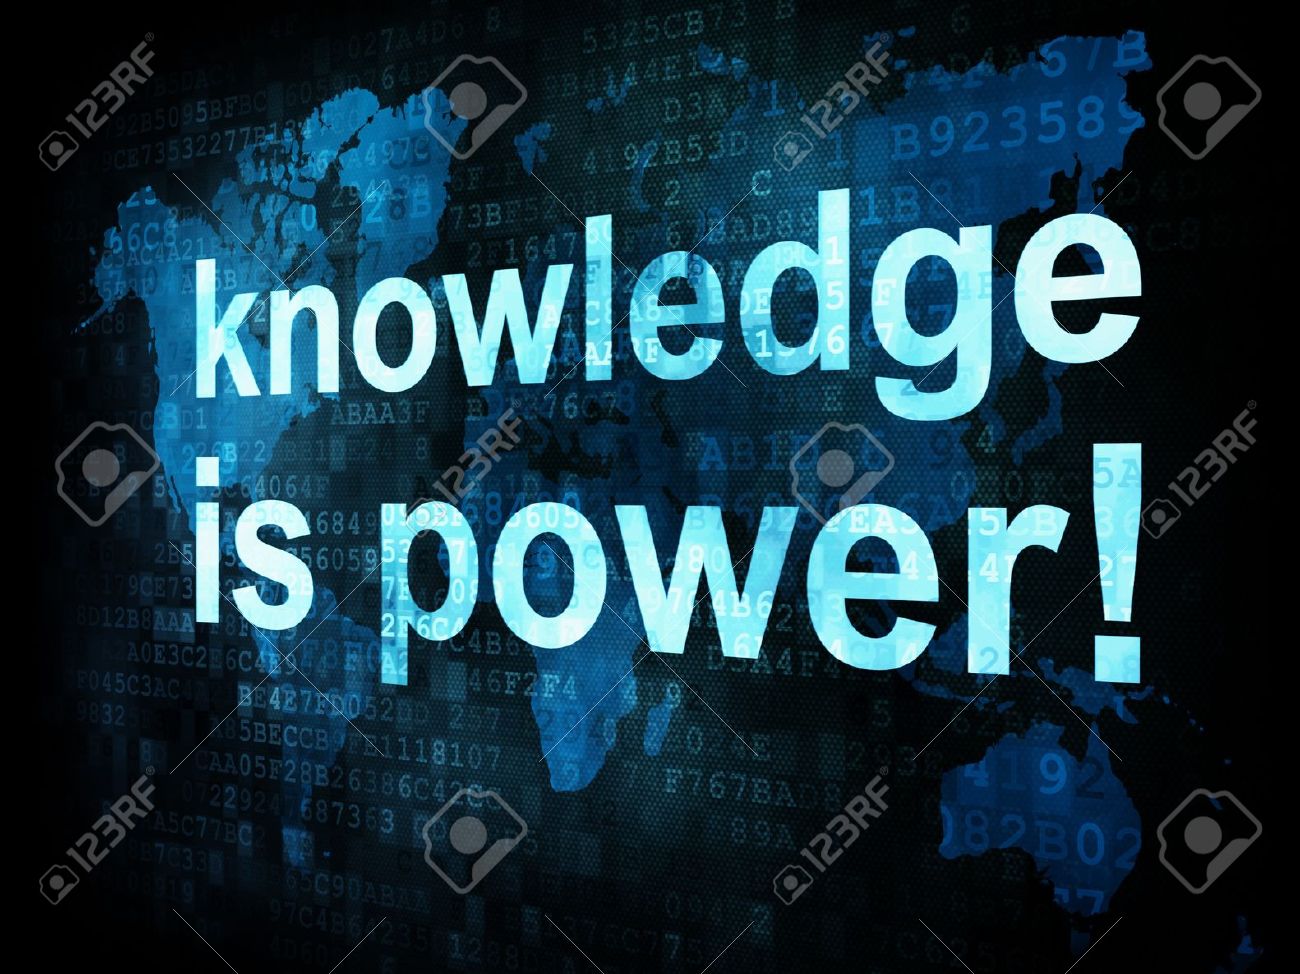 14613648-Education-and-learn-concept-pixelated-words-knowledge-is-power-on-digital-screen-3d-render-Stock-Photo.jpg